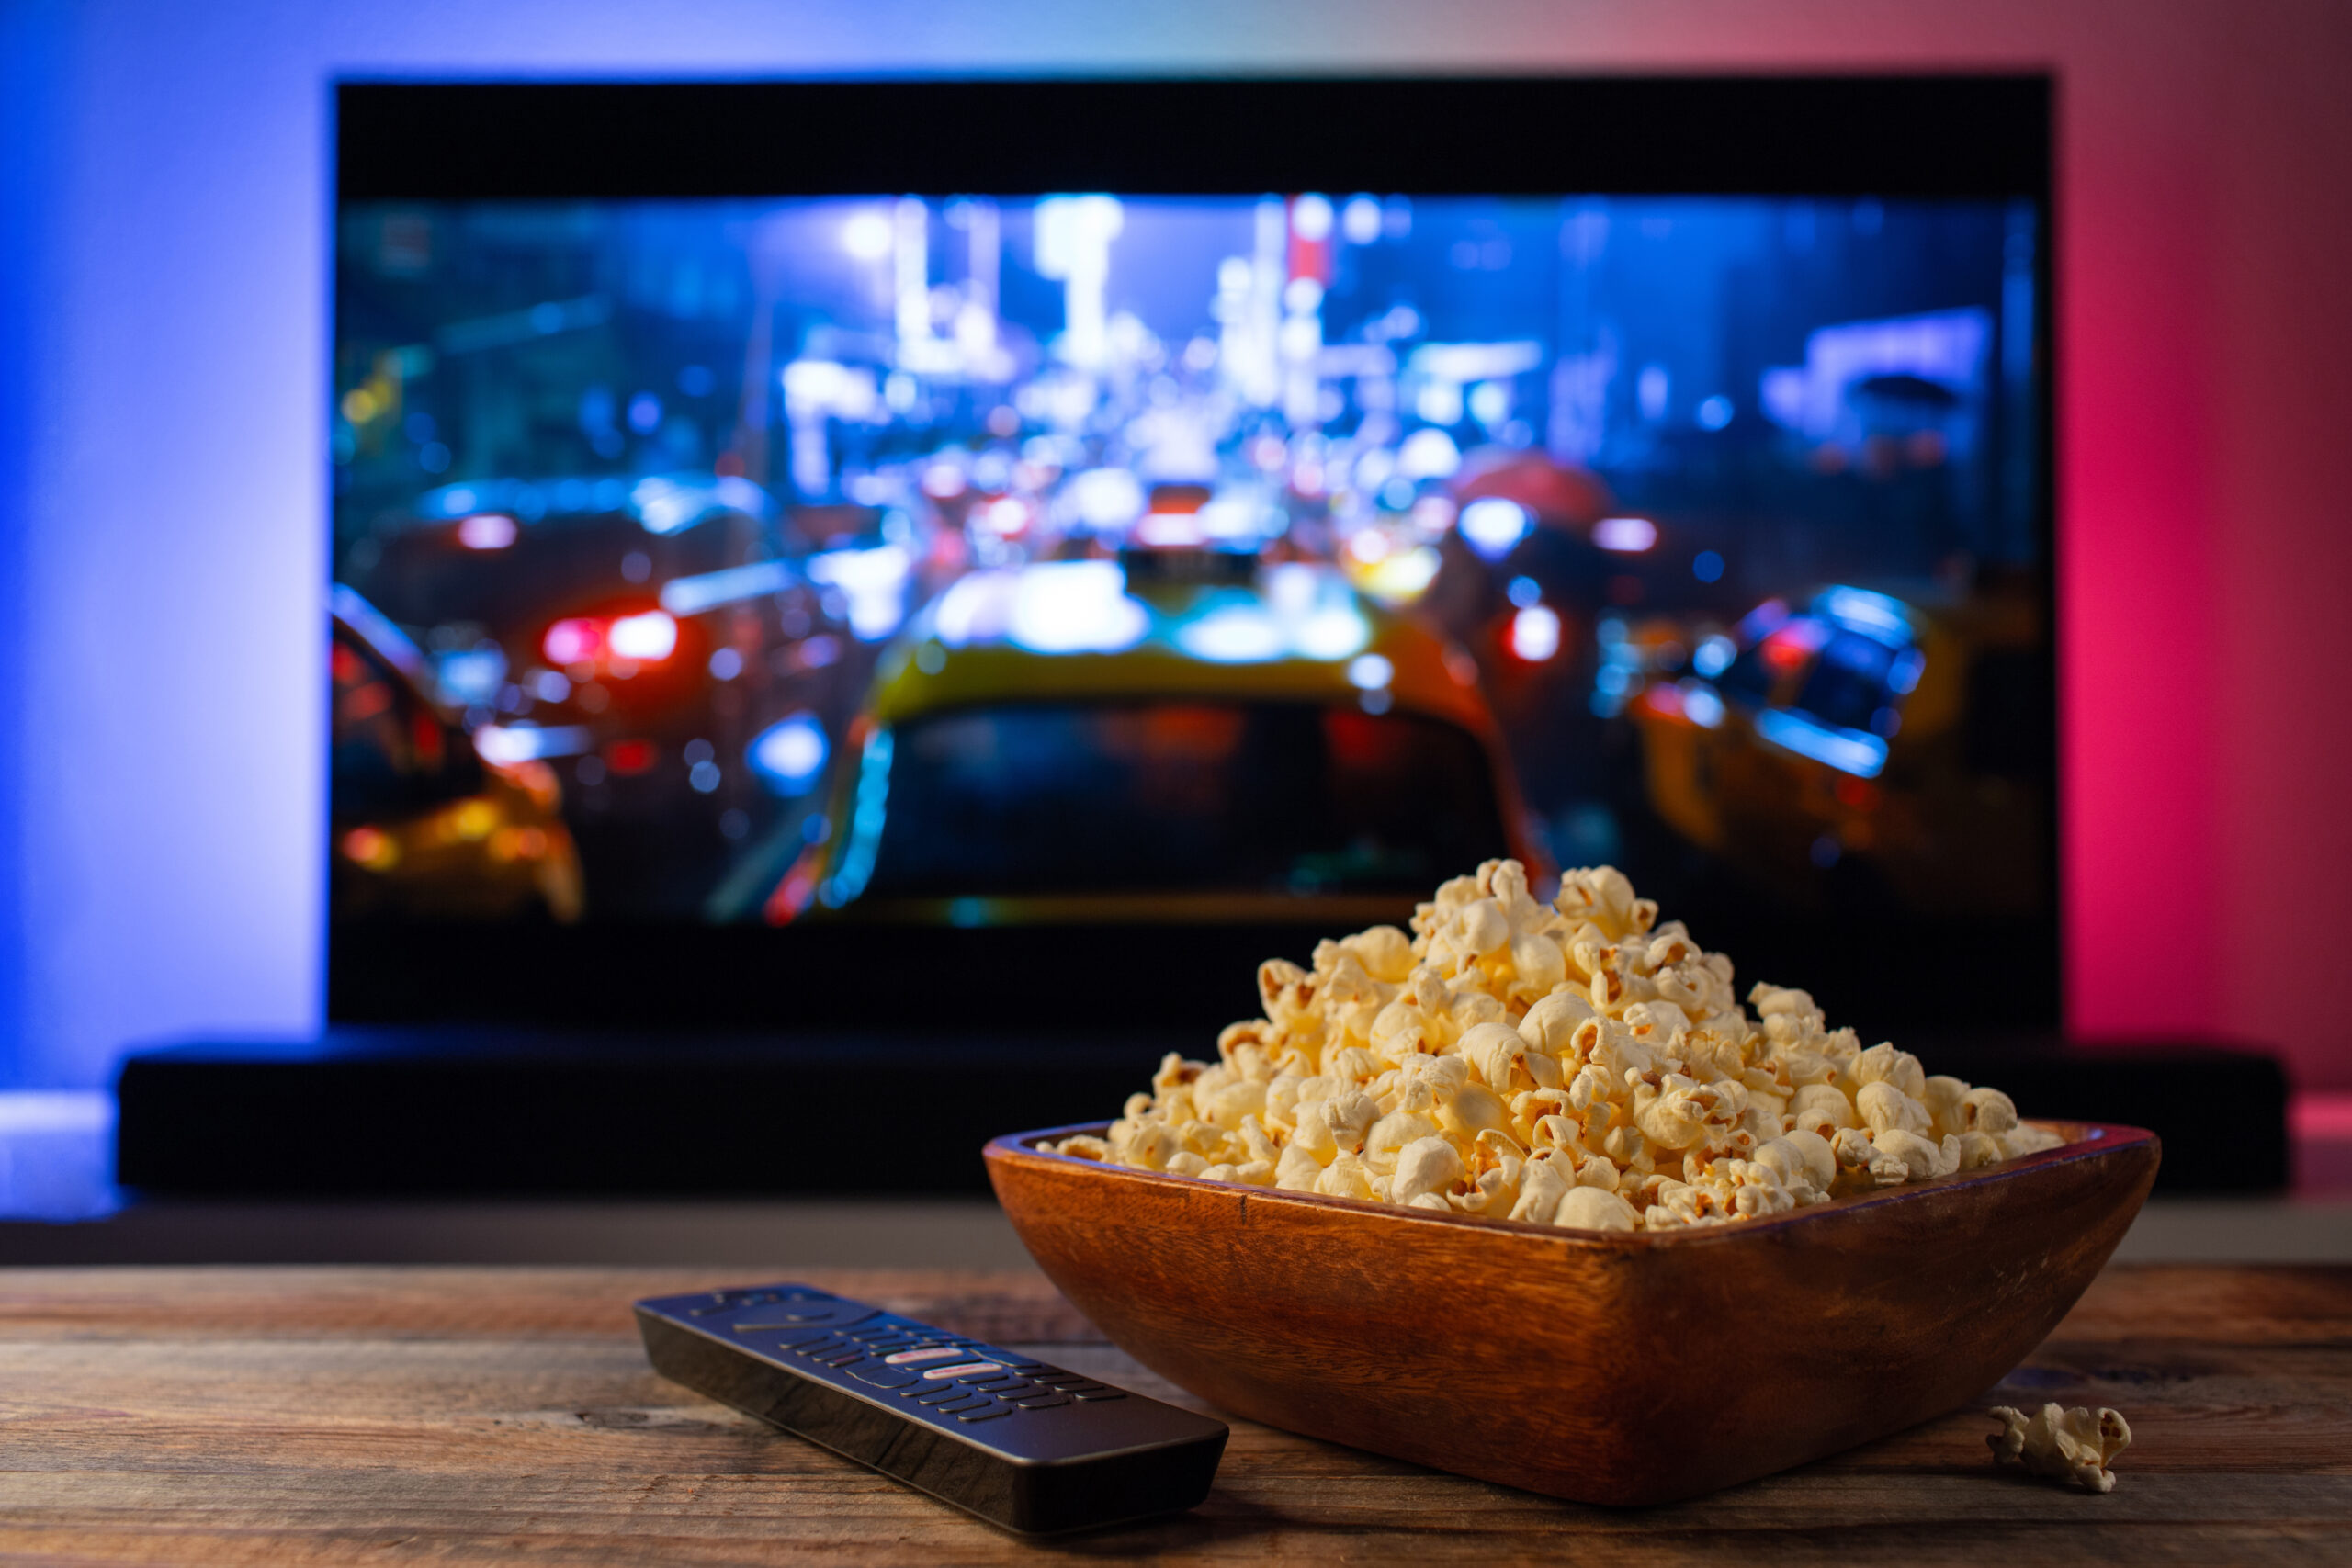 A wooden bowl of popcorn and remote control in the background - a big screen television.